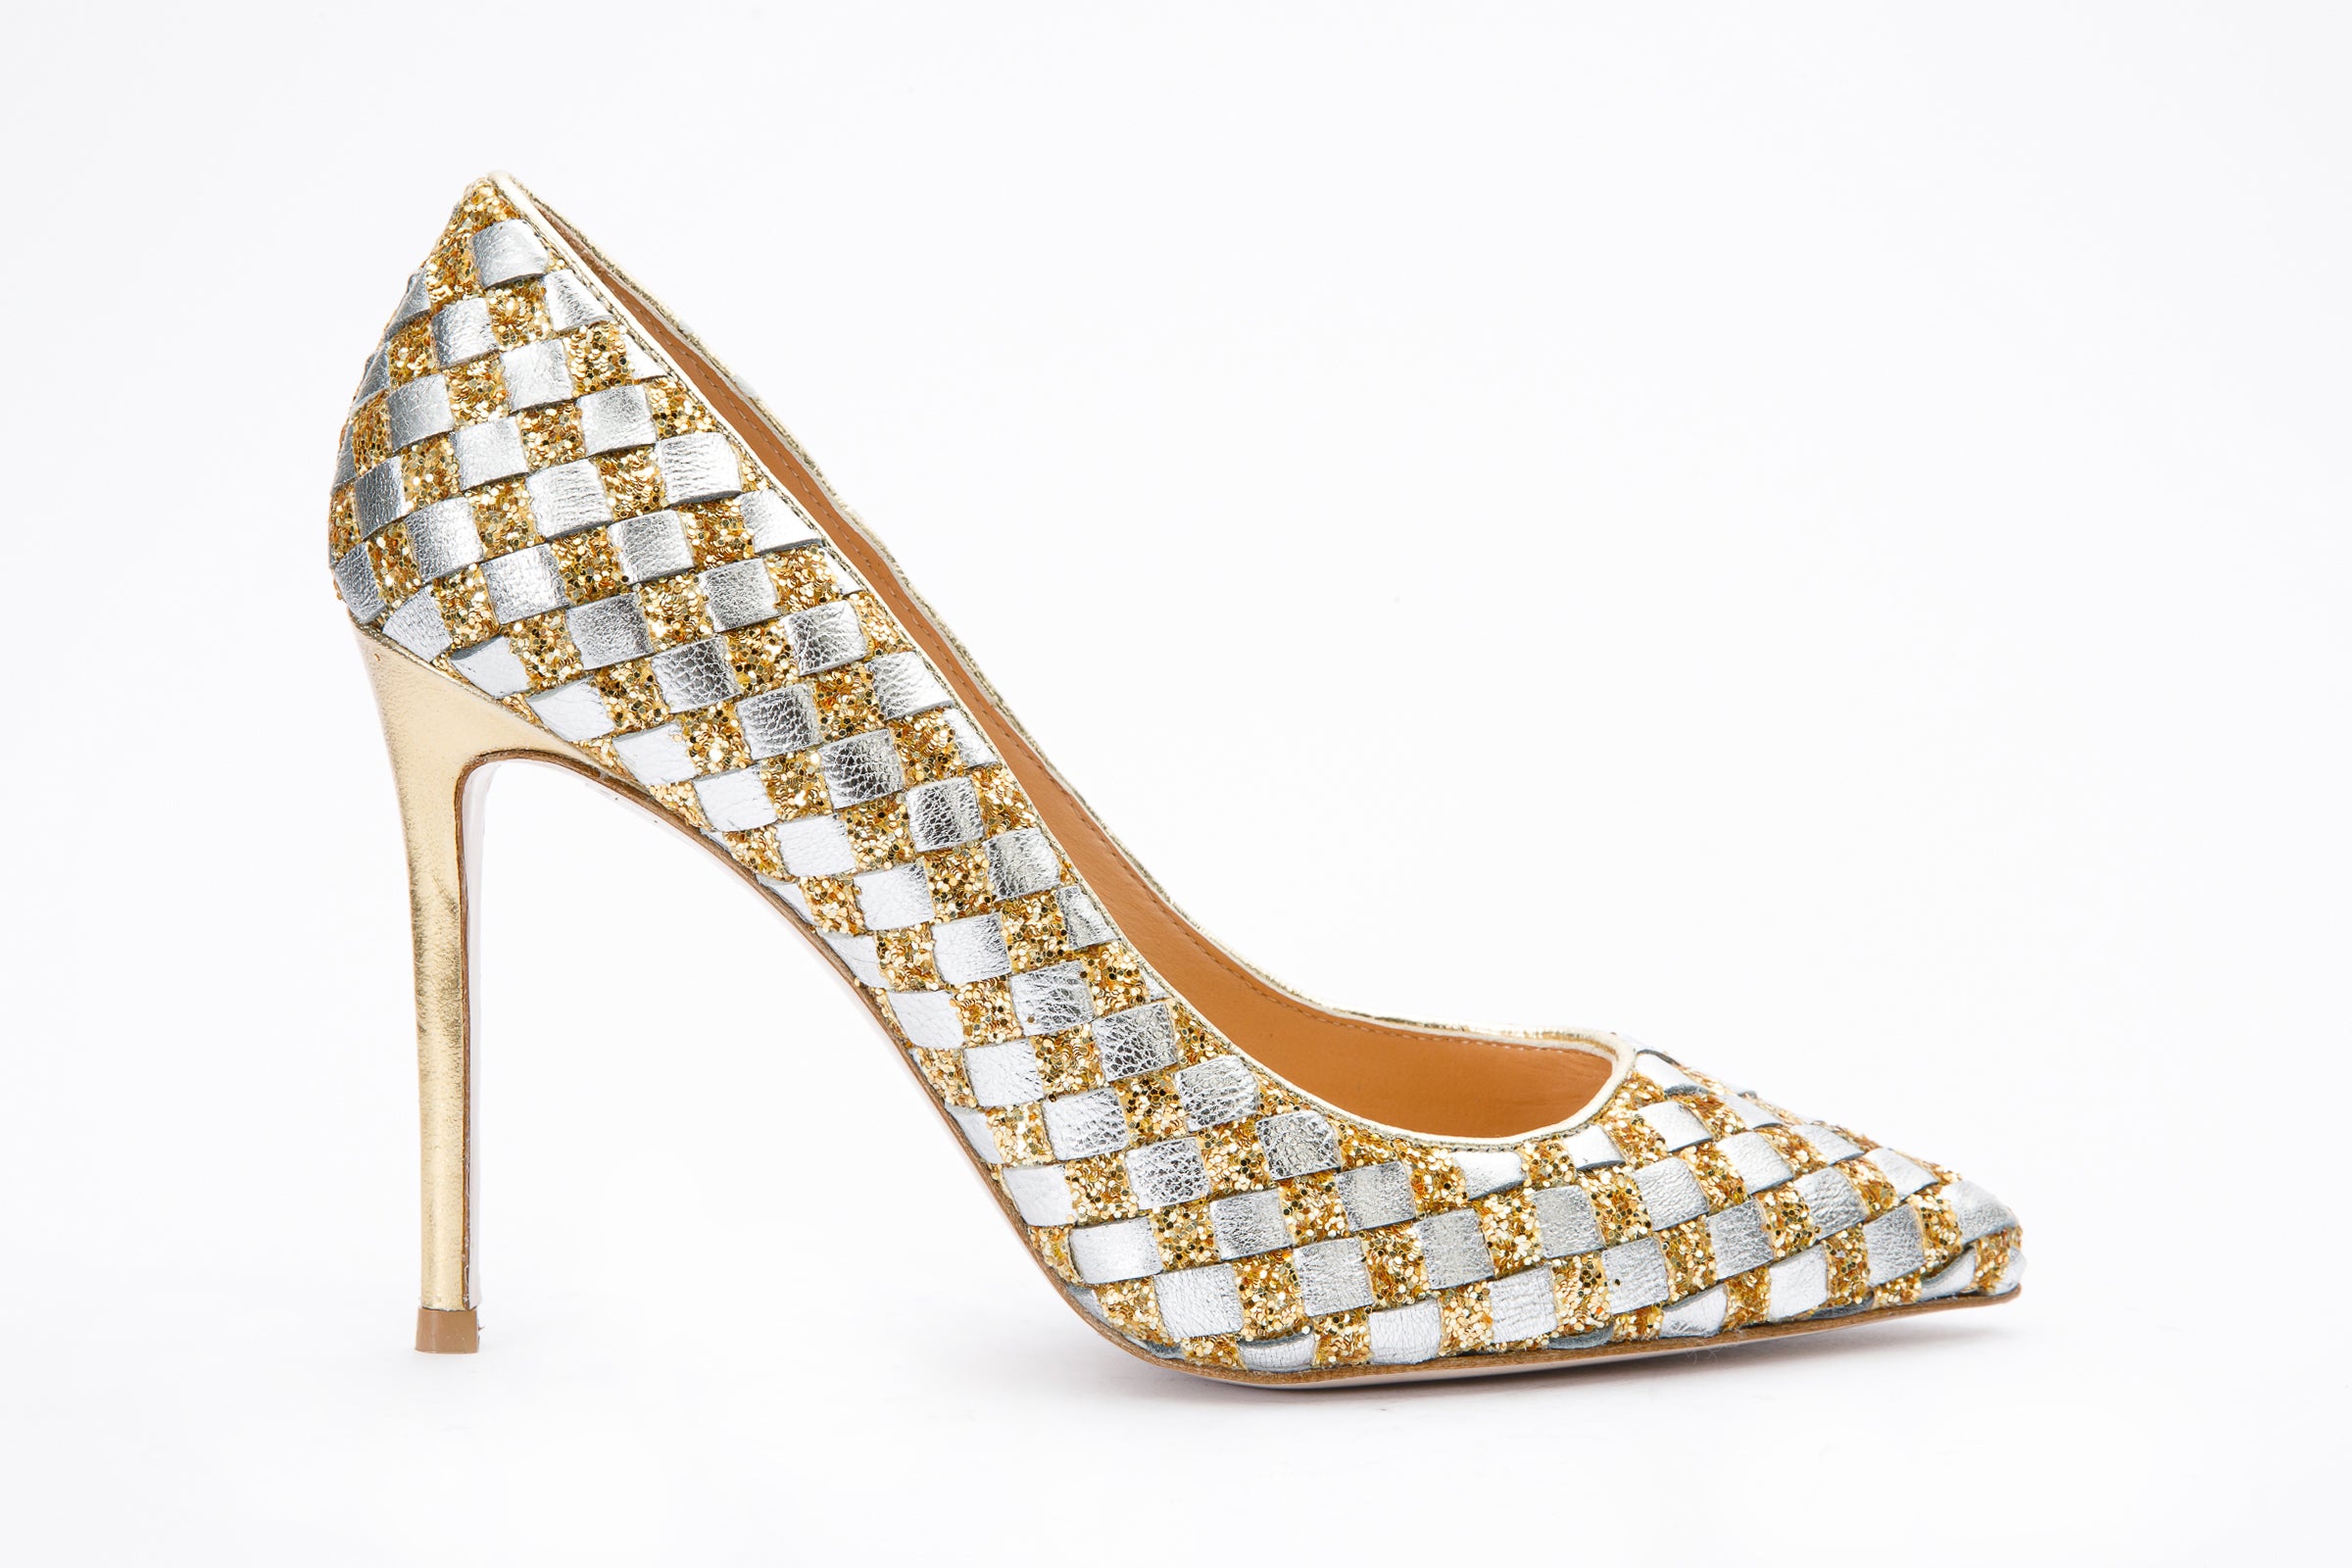 The Saks Tory Gold & Silver Handwoven Leather Pump Women Shoe